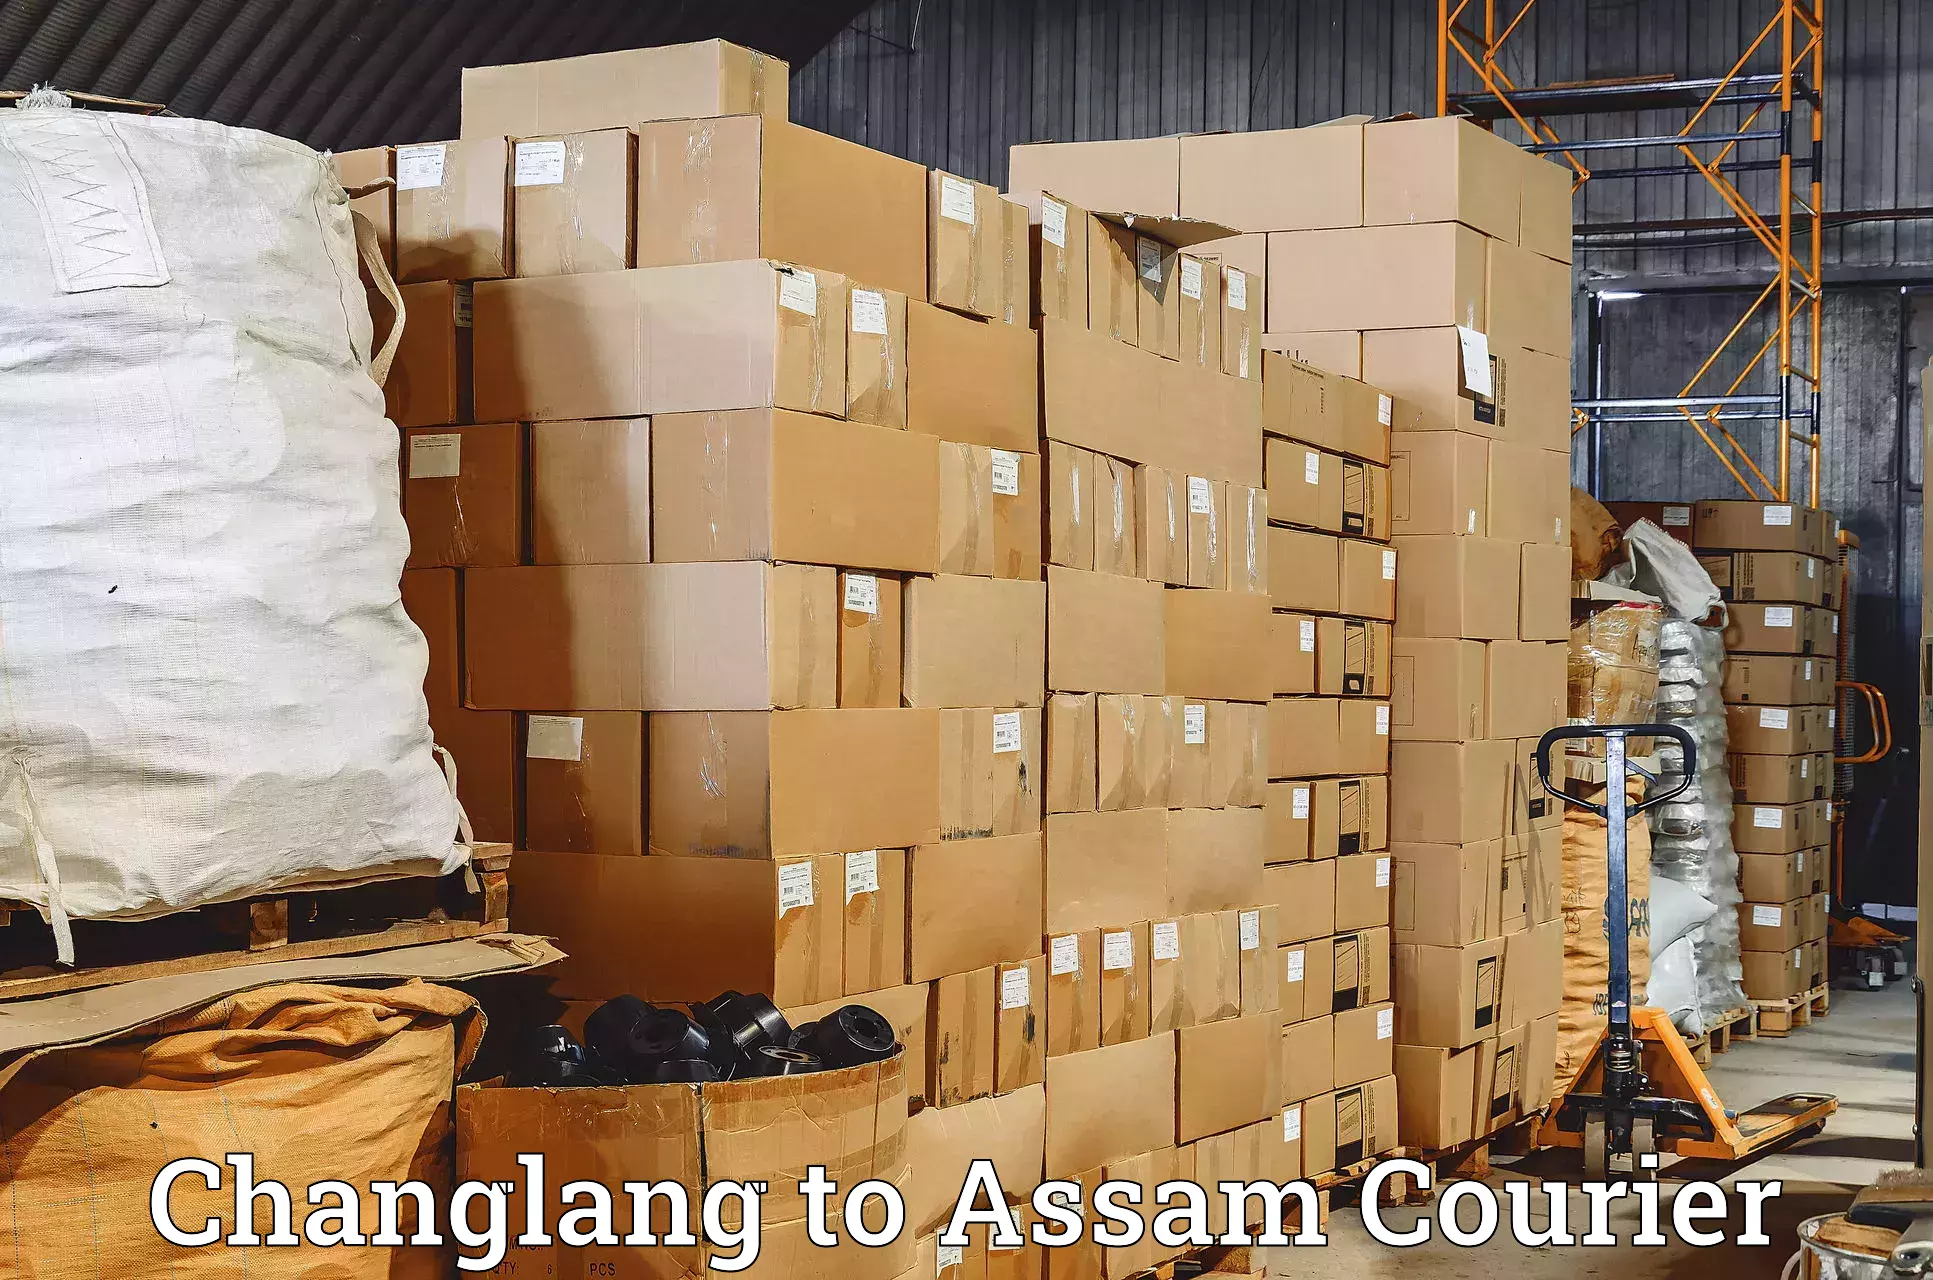 Express delivery capabilities Changlang to Majuli